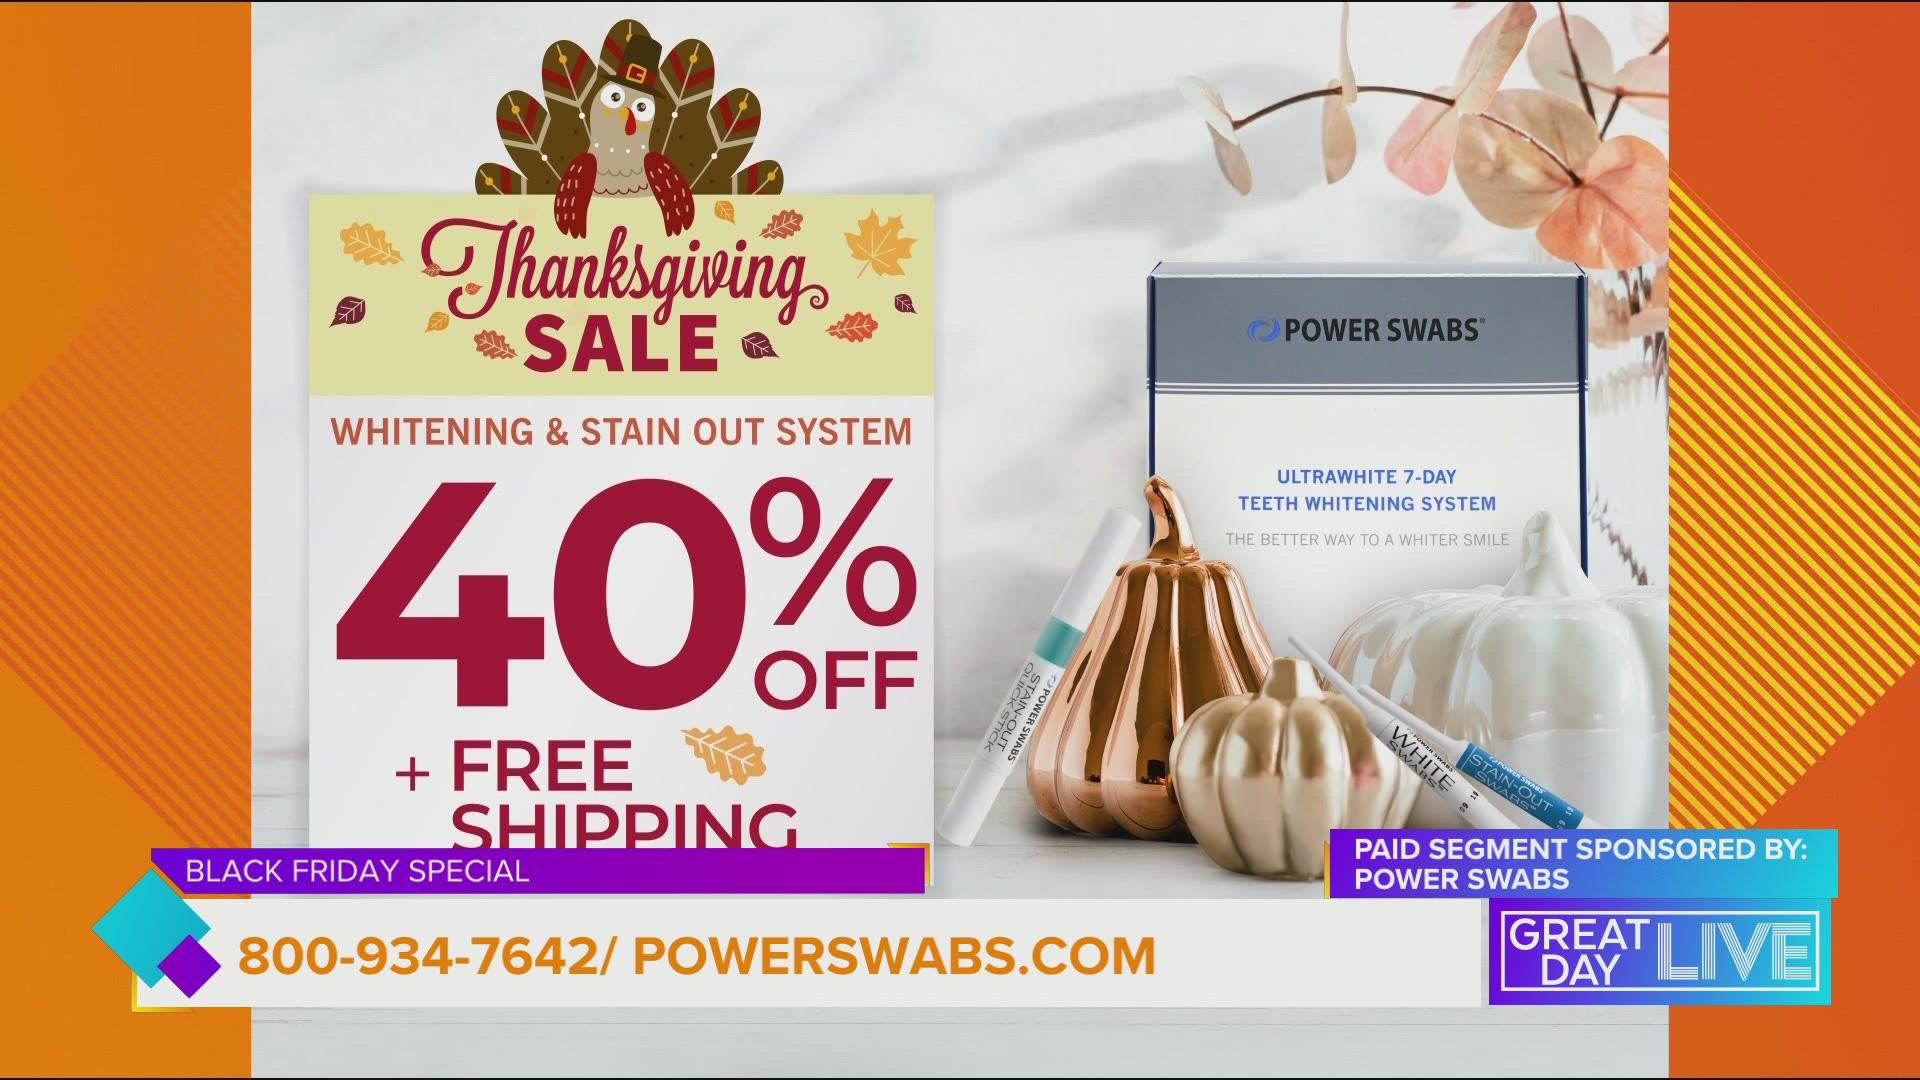 Paid segment sponsored by Power Swabs.